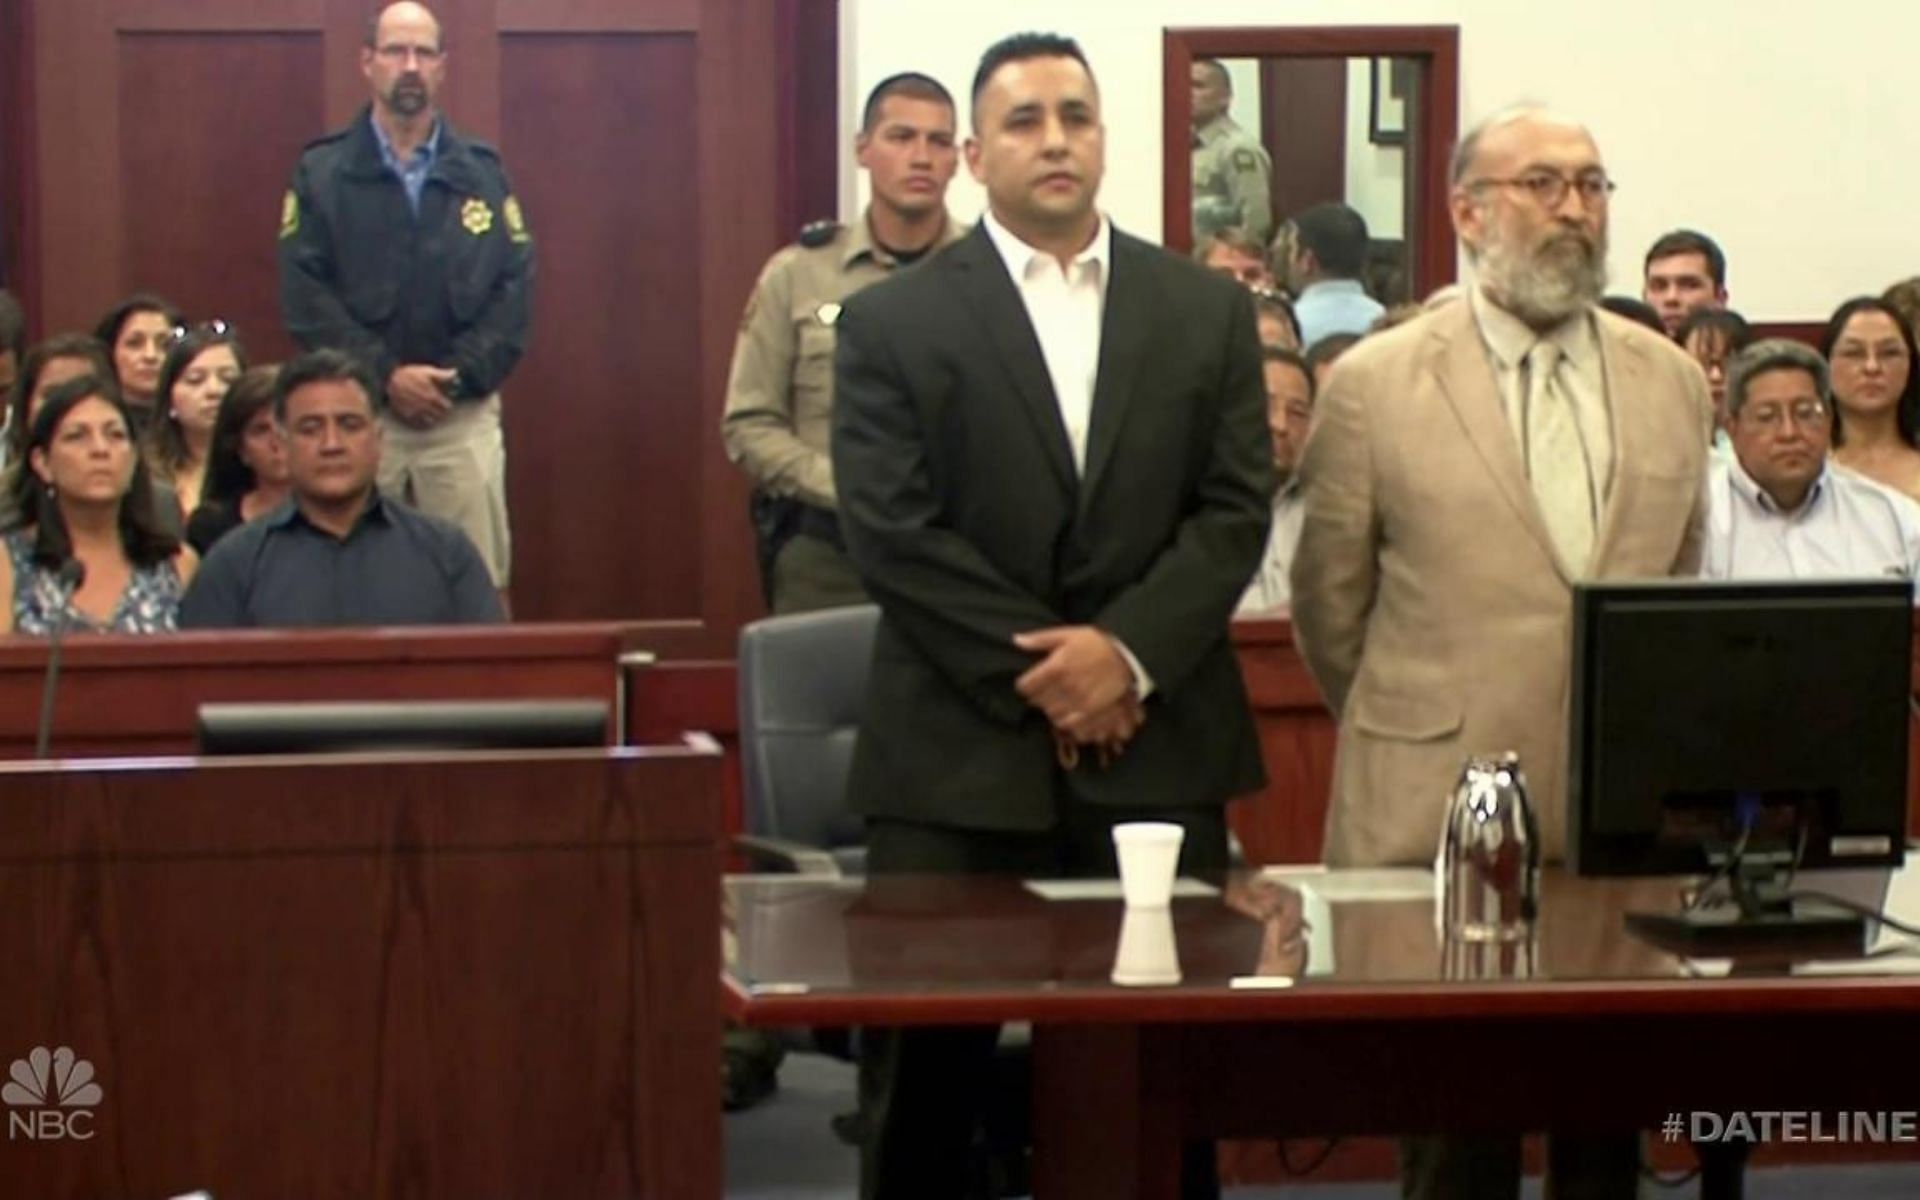 In 2013, Levi Chavez stood trial after being accused of murdering her wife, Tera Chavez (Image via NBC)